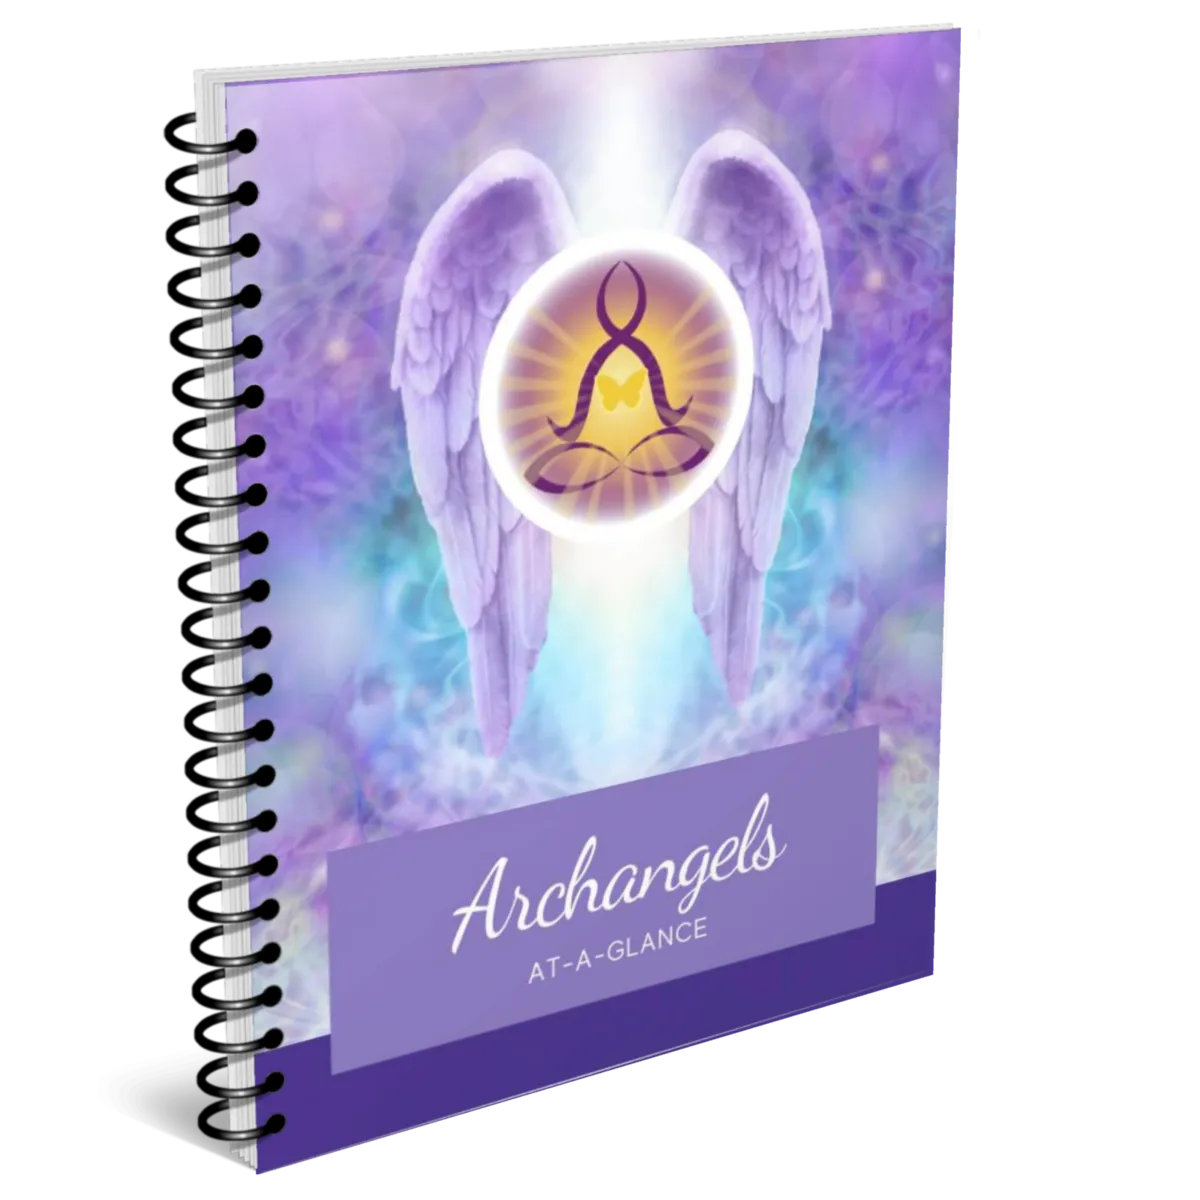 Archangels At-a-Glance